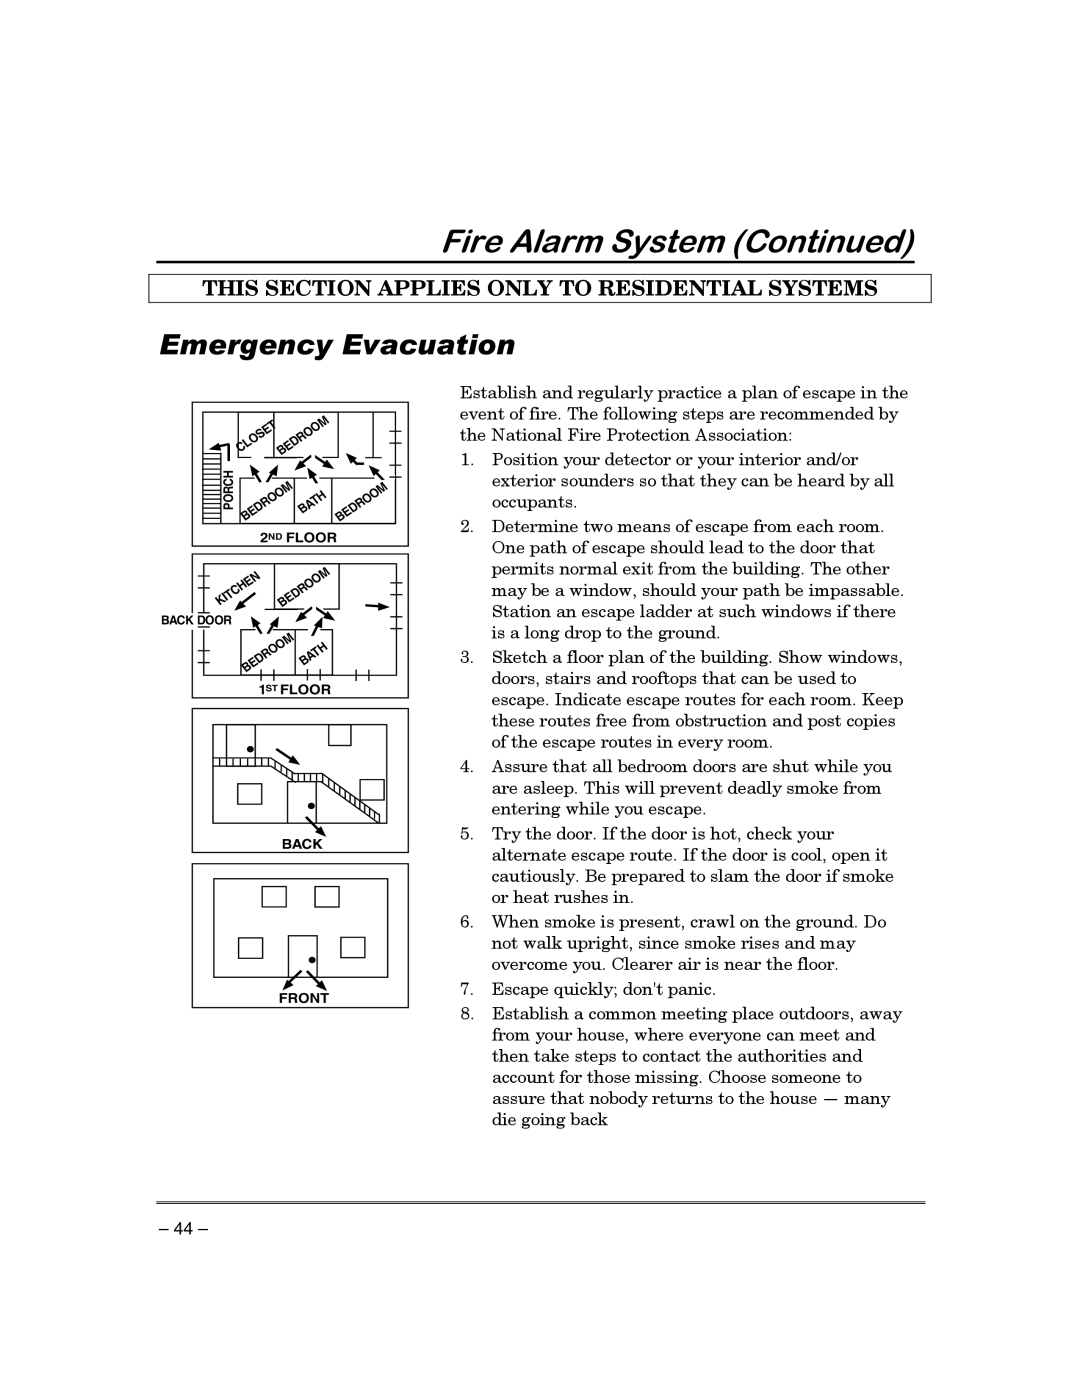 First Alert FA130CP manual Phujhqf\Ydfxdwlrq, LUH$ODUP6\VWHP&RQWLQXHG, This Section Applies Only To Residential Systems 